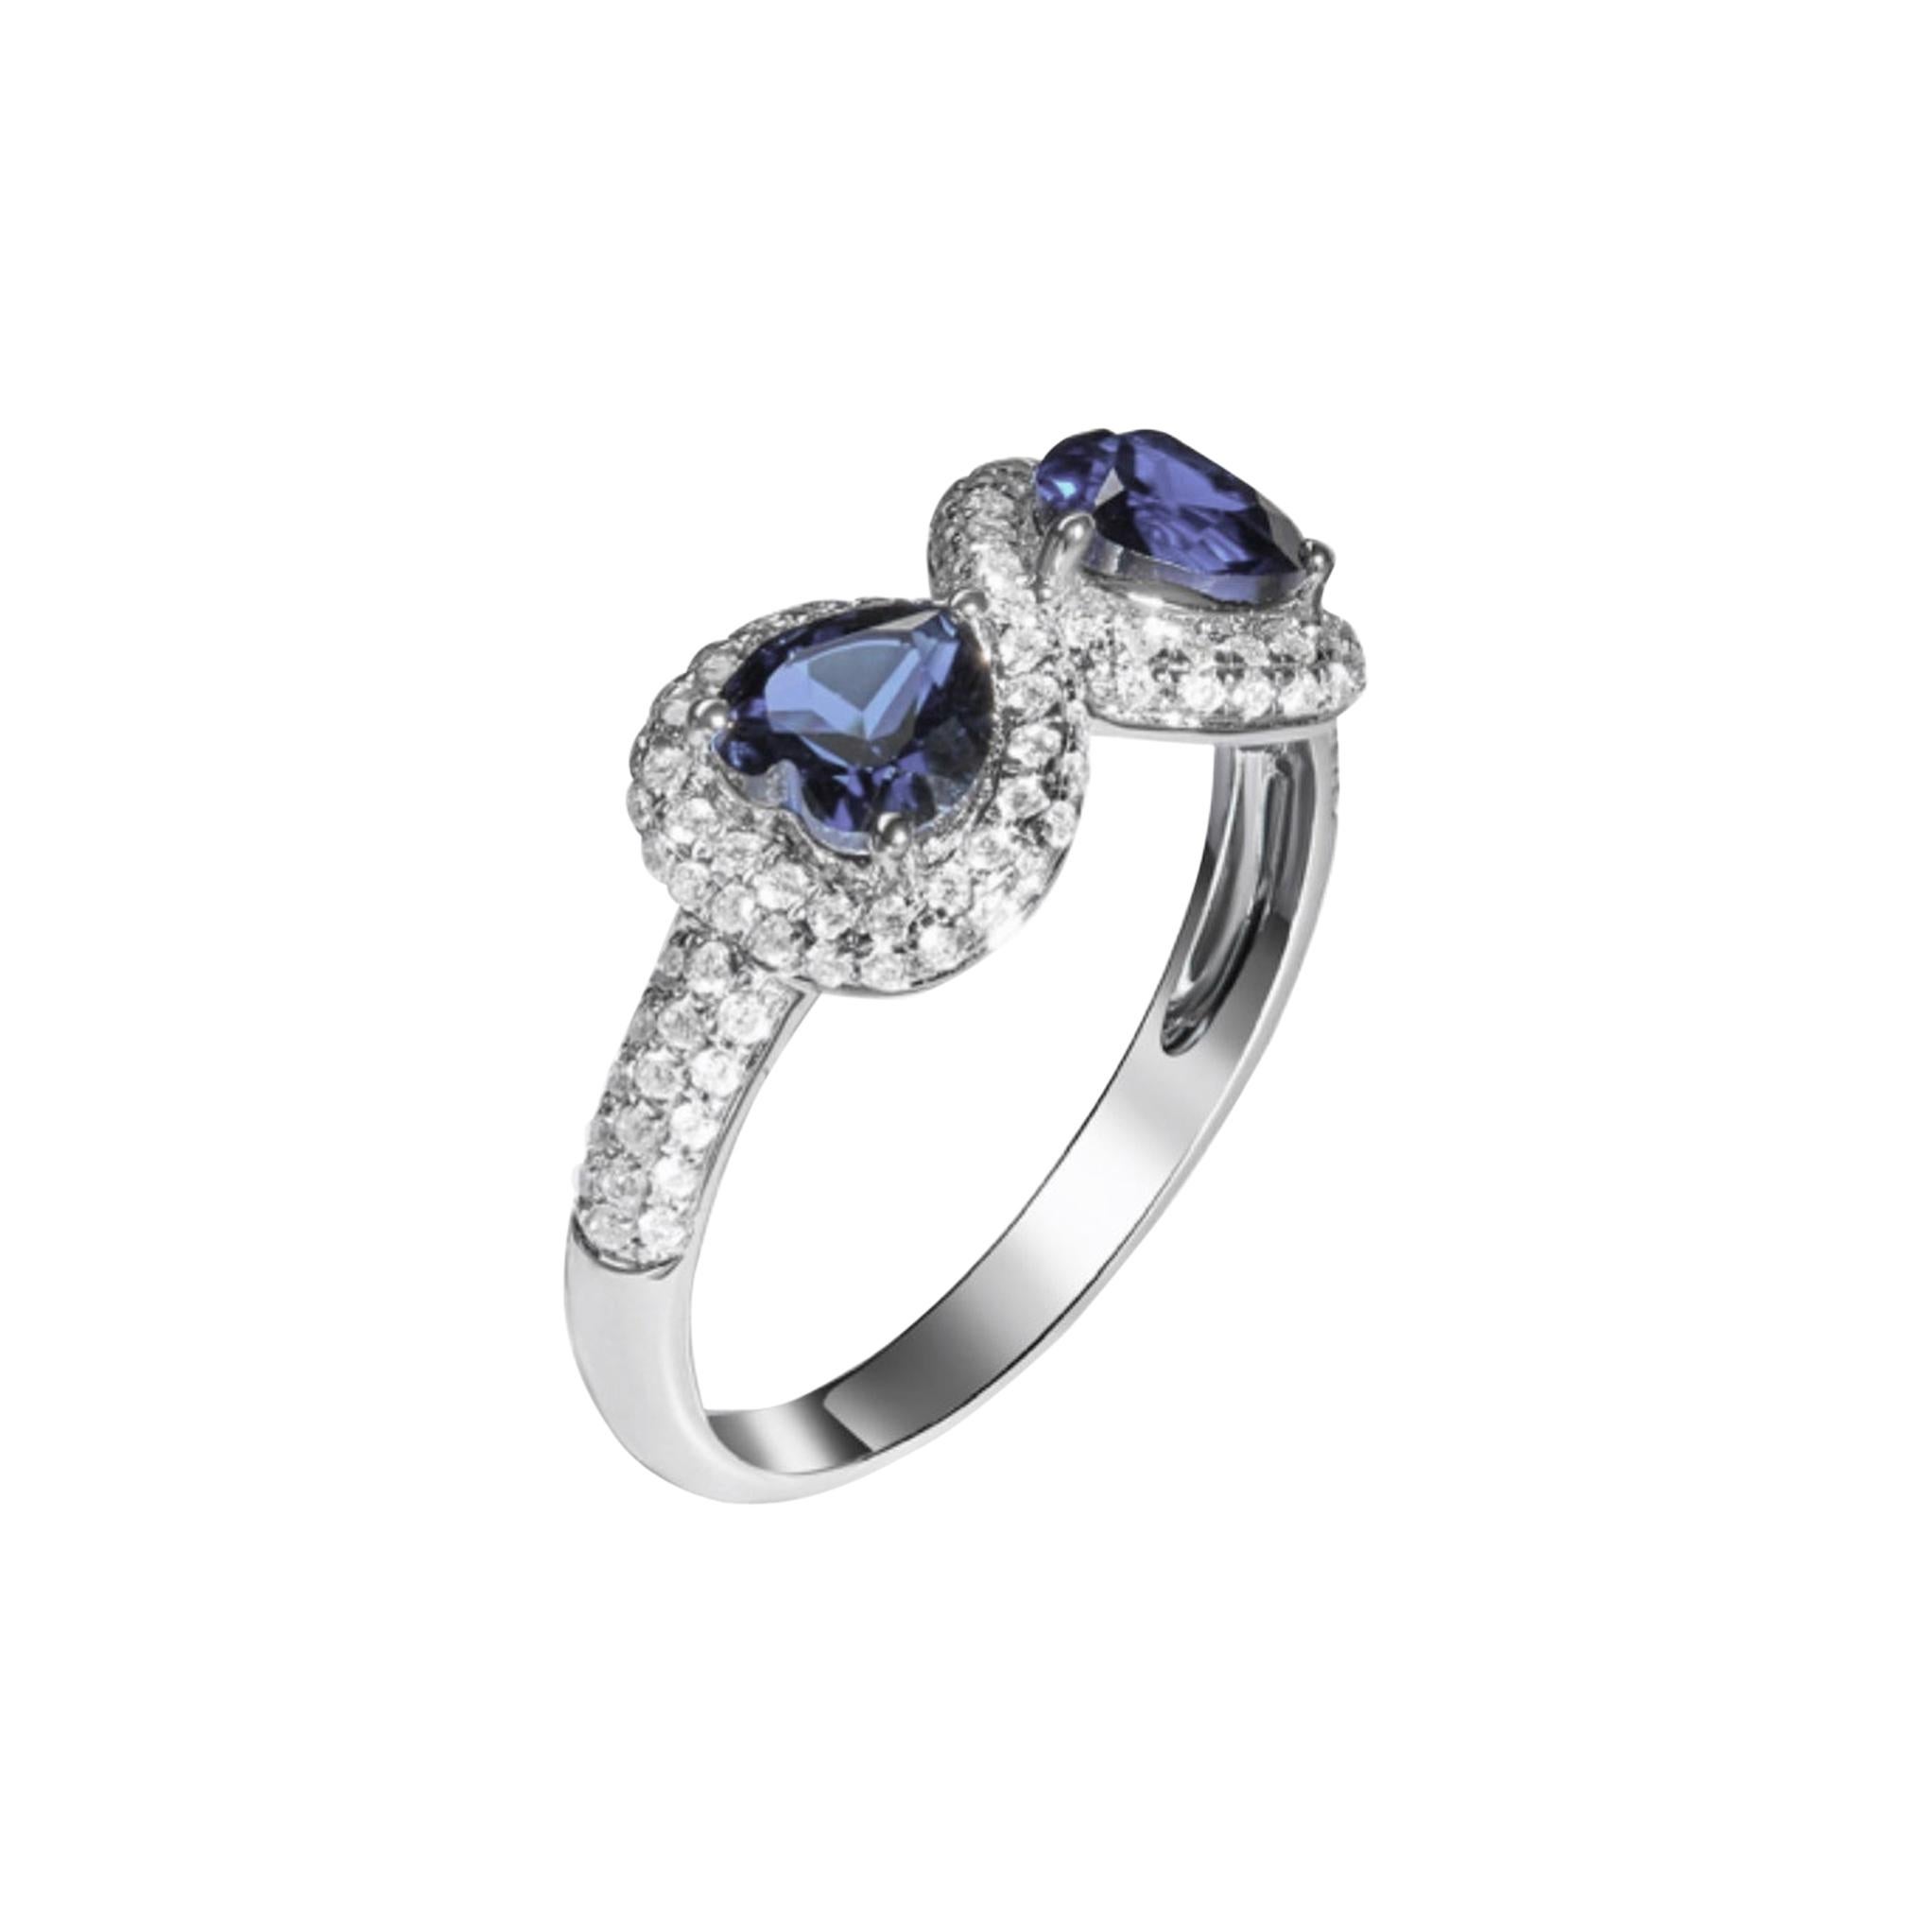 “Infinite Eight of Hearts” Diamonds and Iolite Hearts Ring